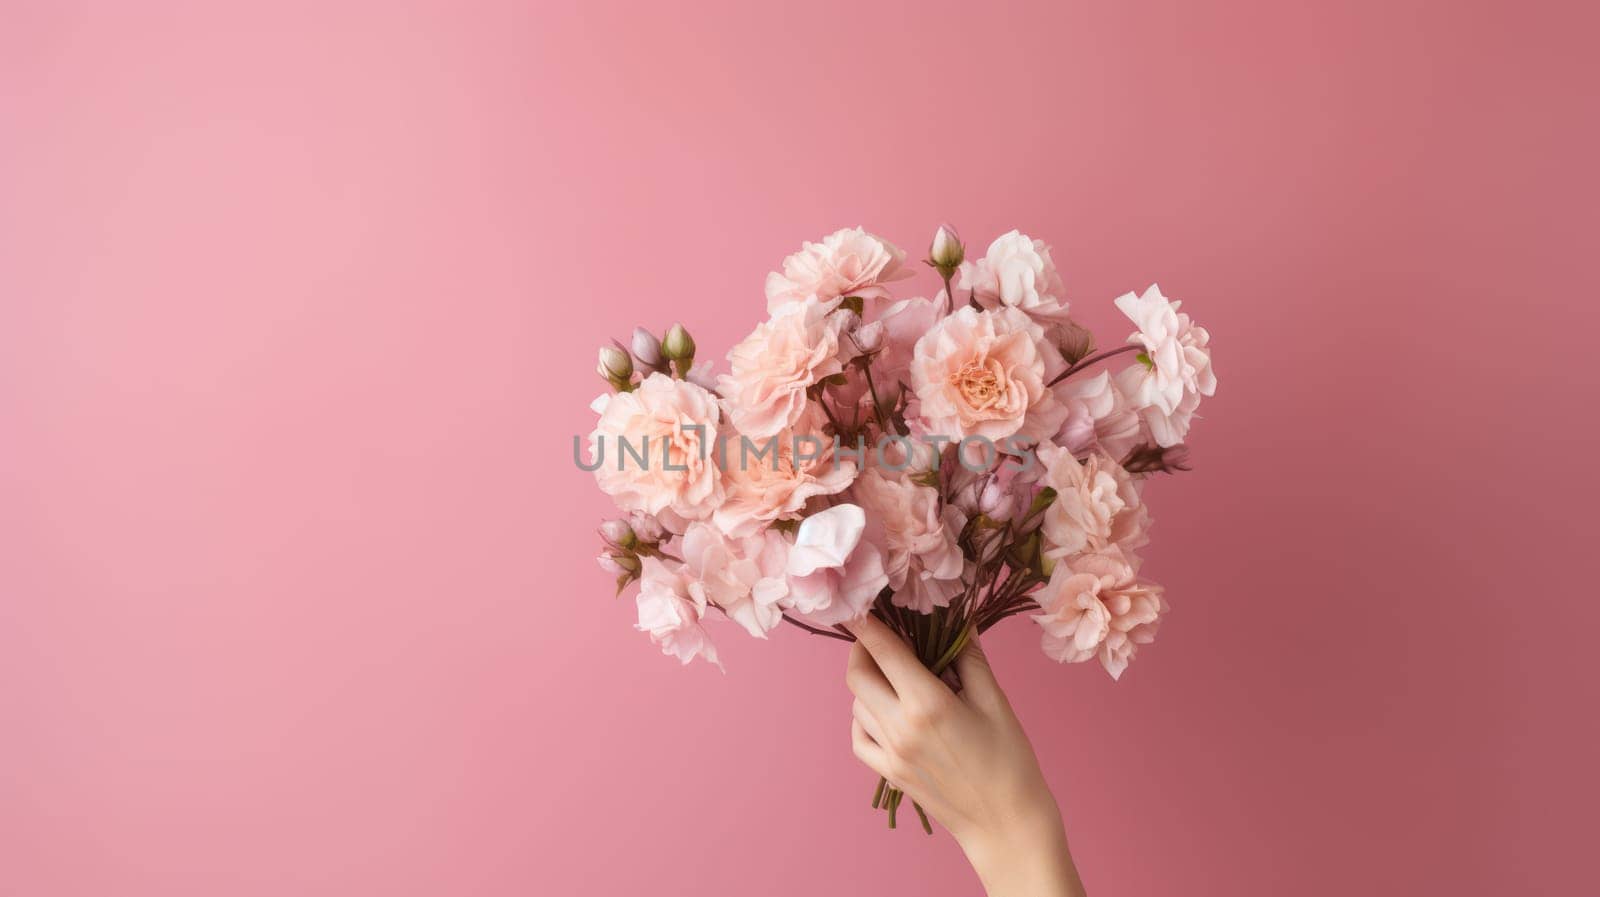 Blossoming Beauty: A Romantic Bouquet of Pink Peonies Held Lovingly by a Woman on a Floral Background by Vichizh